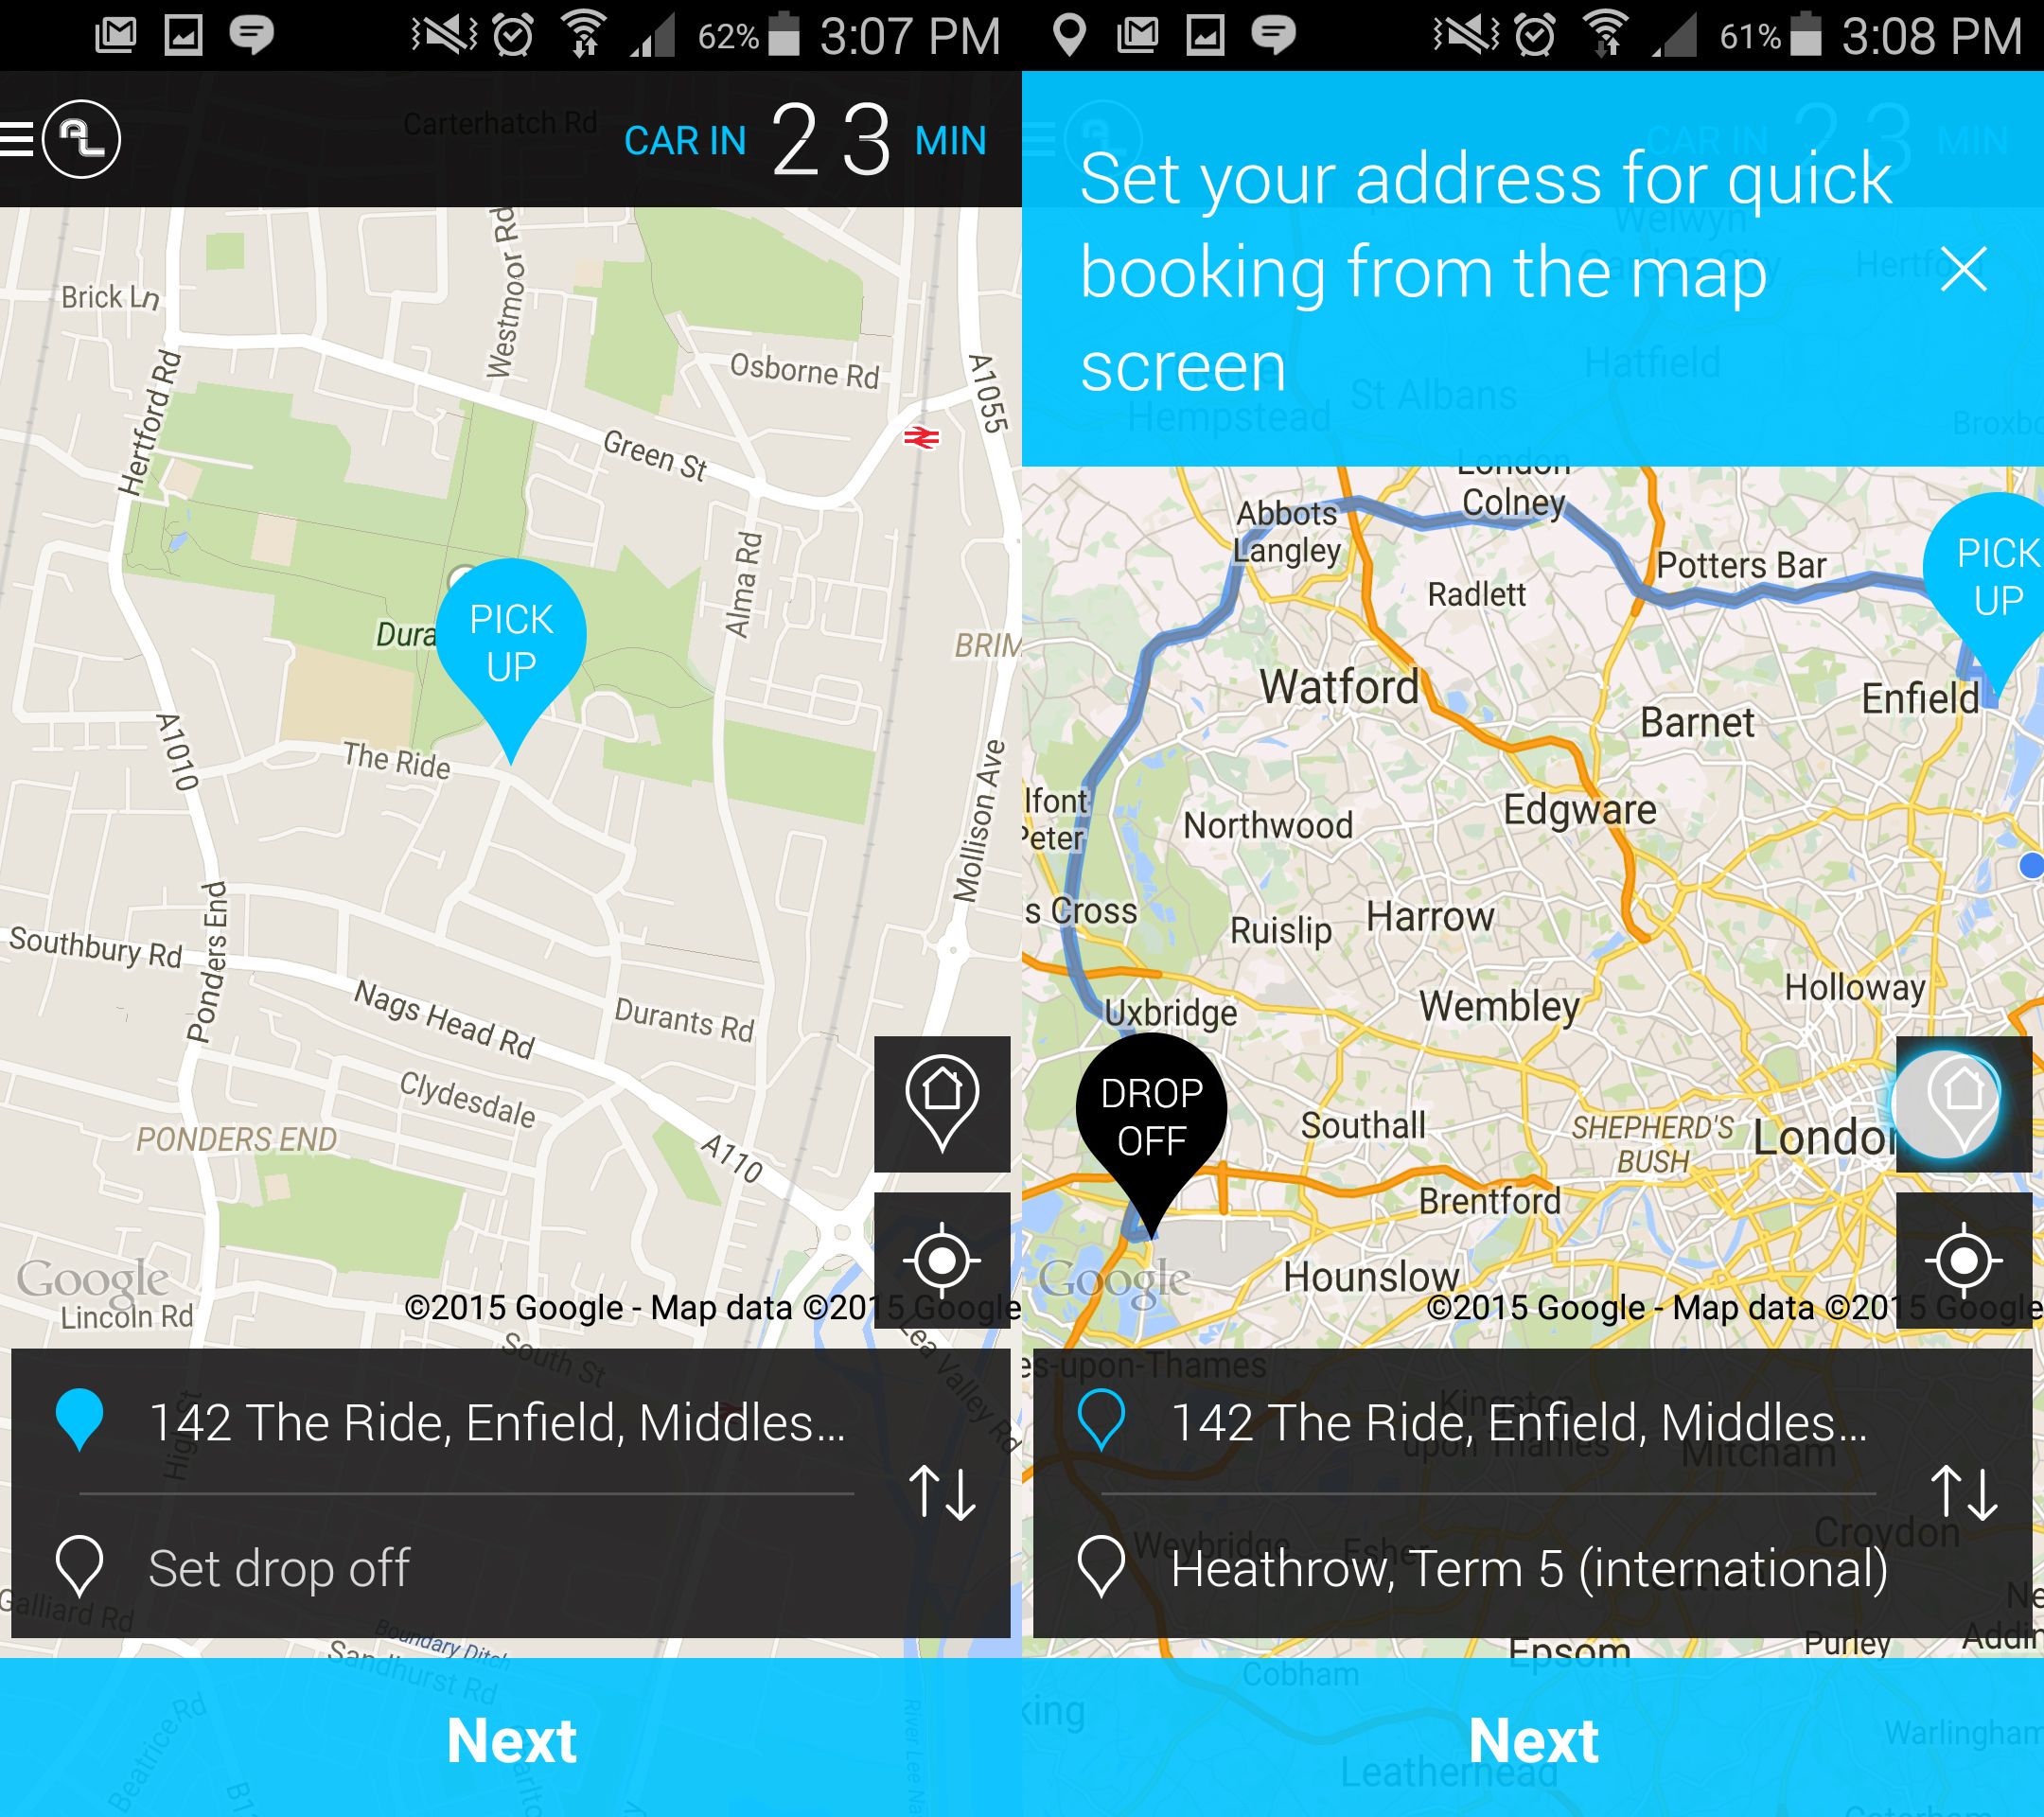 addison lee app review order or pre book minicabs with ease hands on image 8